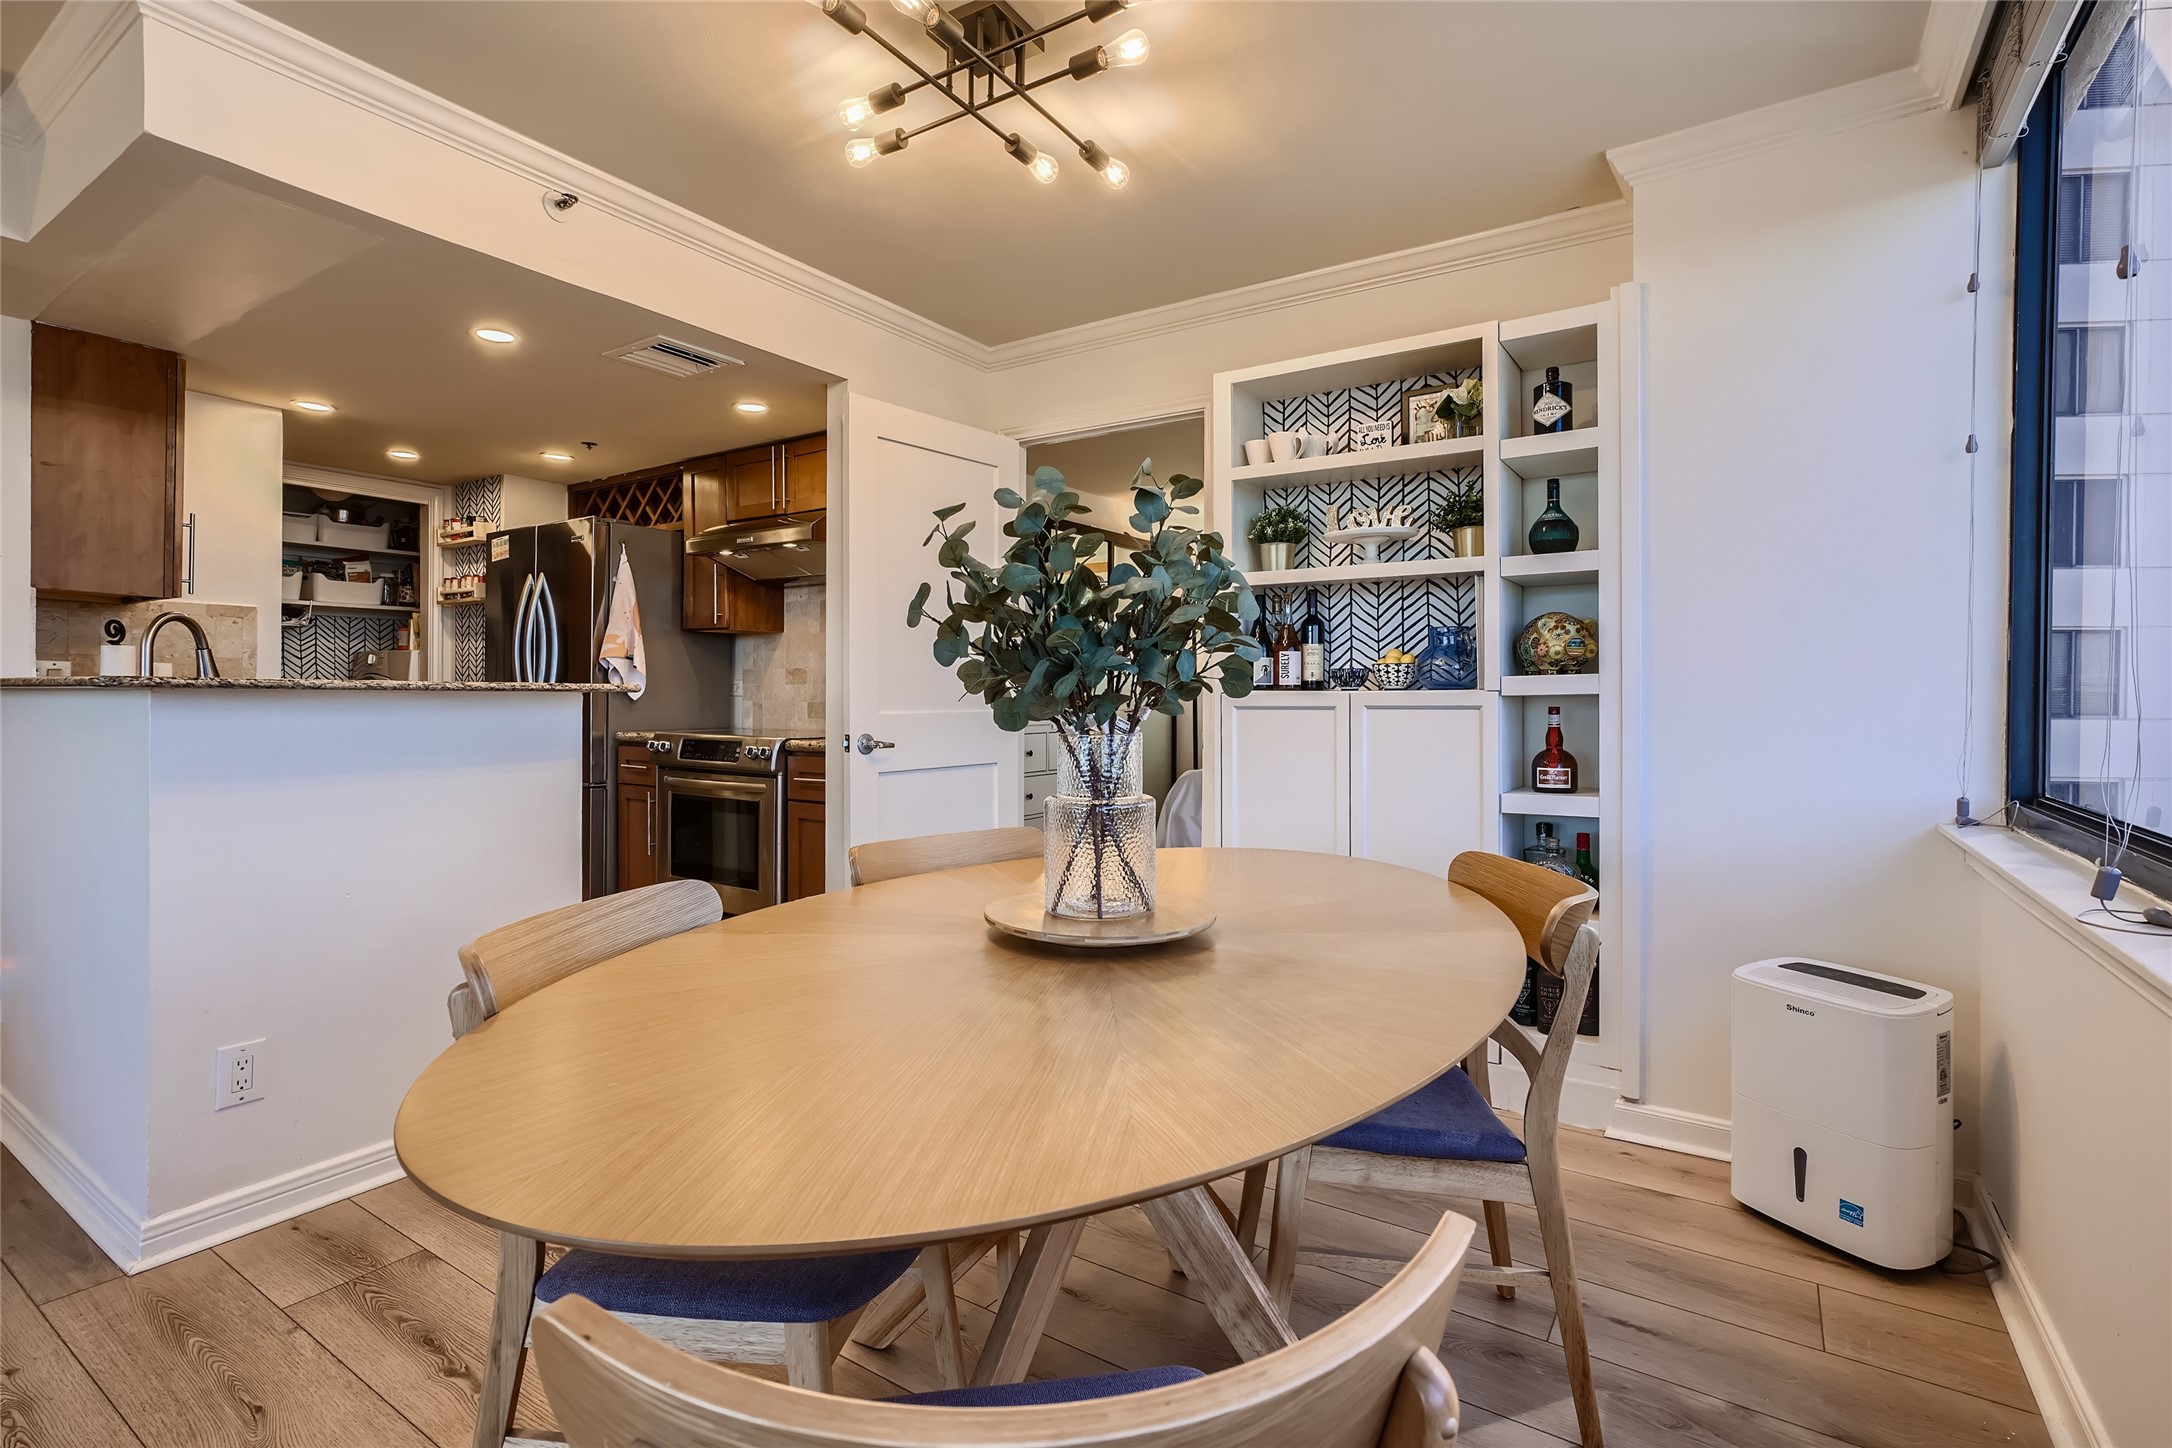 Capture the seamless flow from the kitchen to the dining room, with a view showcasing a custom-built cabinet. This thoughtful addition provides practical storage and an elegant display for décor.